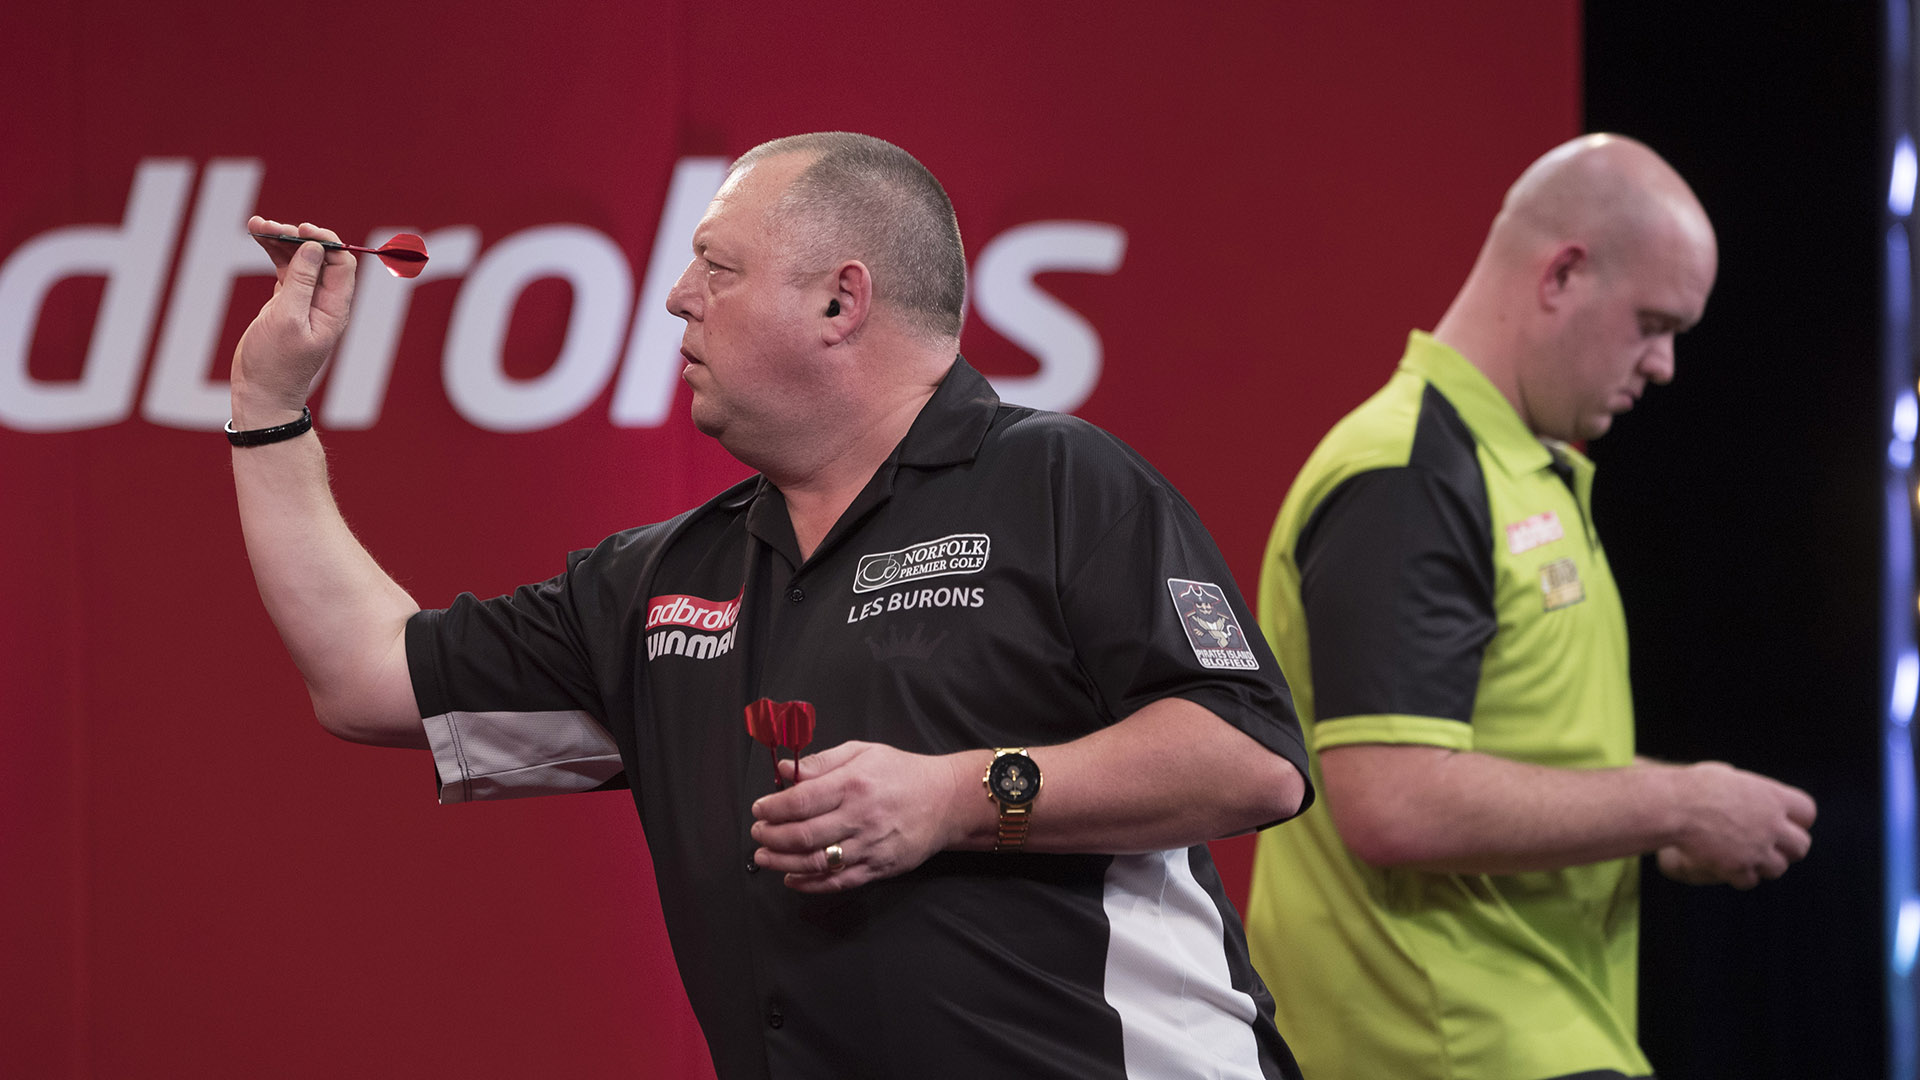 UK Open darts results Michael van Gerwen and Gary Anderson crash out on opening night in Minehead